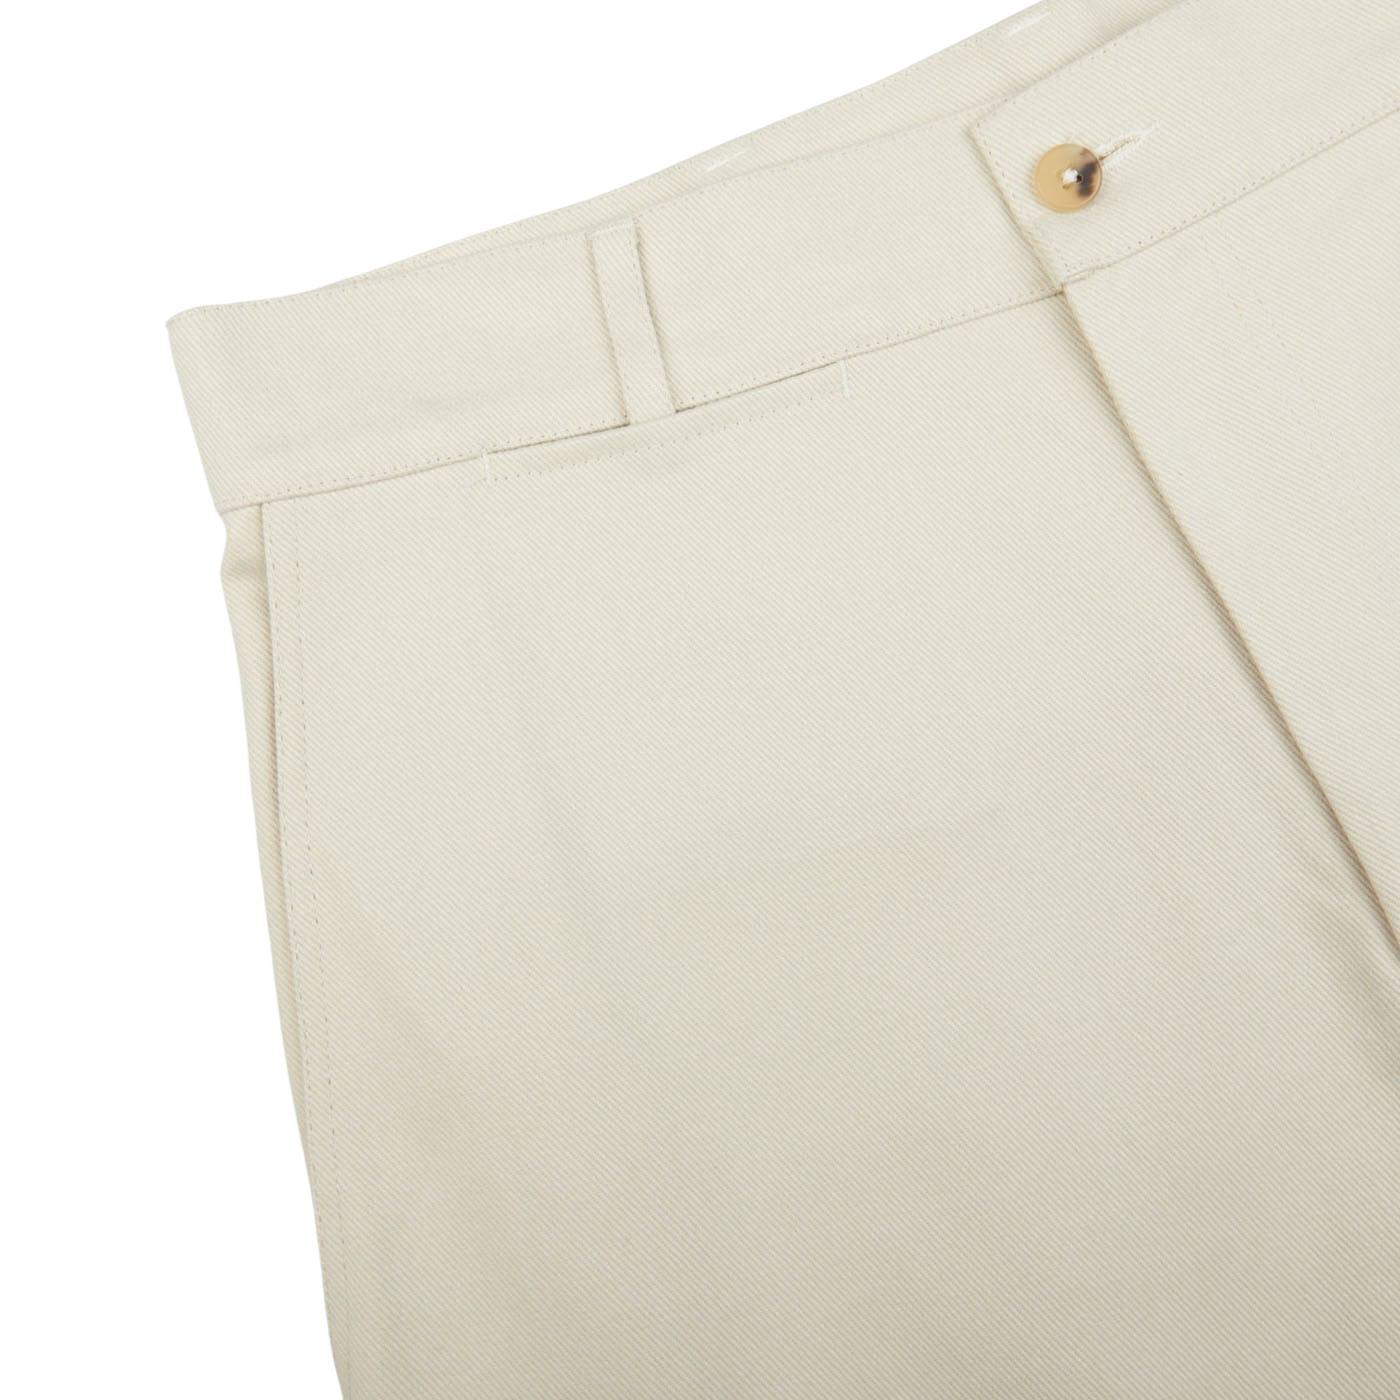 Close-up of a beige De Bonne Facture Undyed Heavy Cotton Drill Balloon Trousers waistband with a button closure.